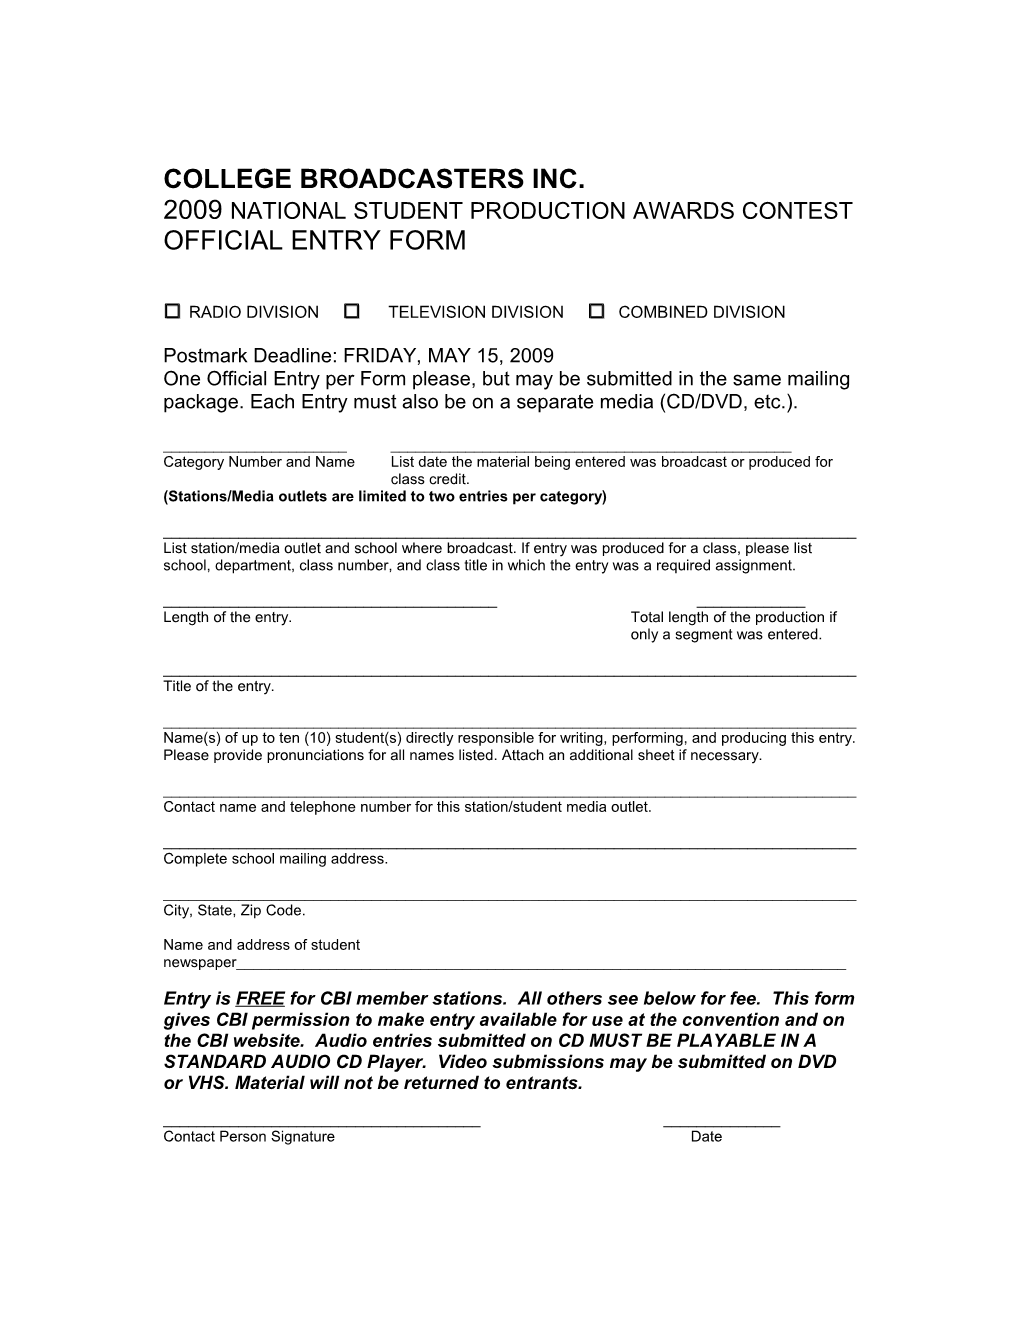 College Broadcasters Inc